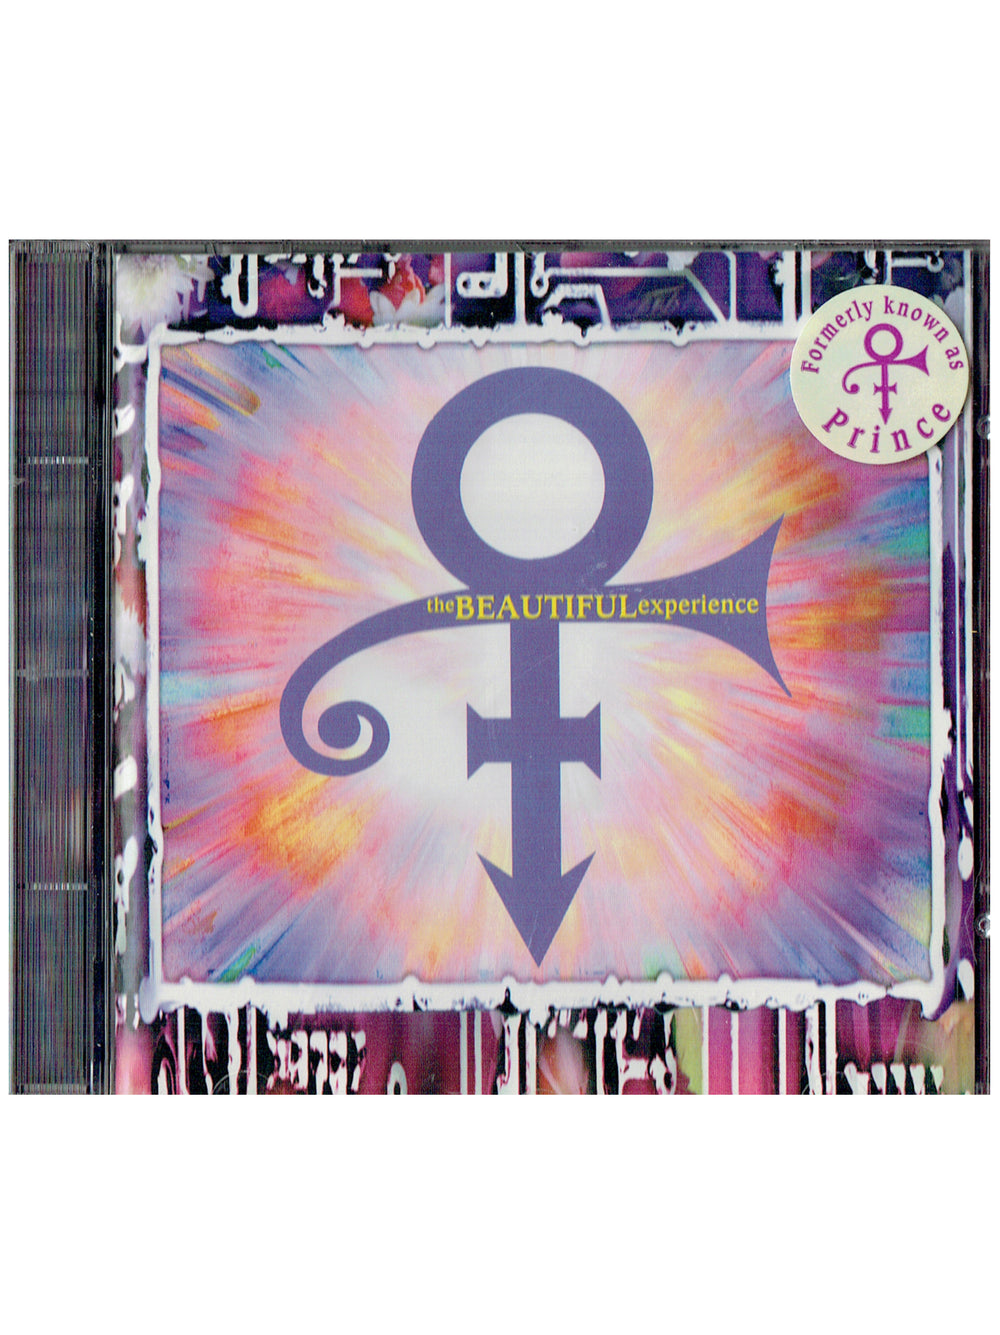 Prince – 0(+> The Beautiful Experience Butterfly Cut-Out CD EP UK Europe Preloved: 1994